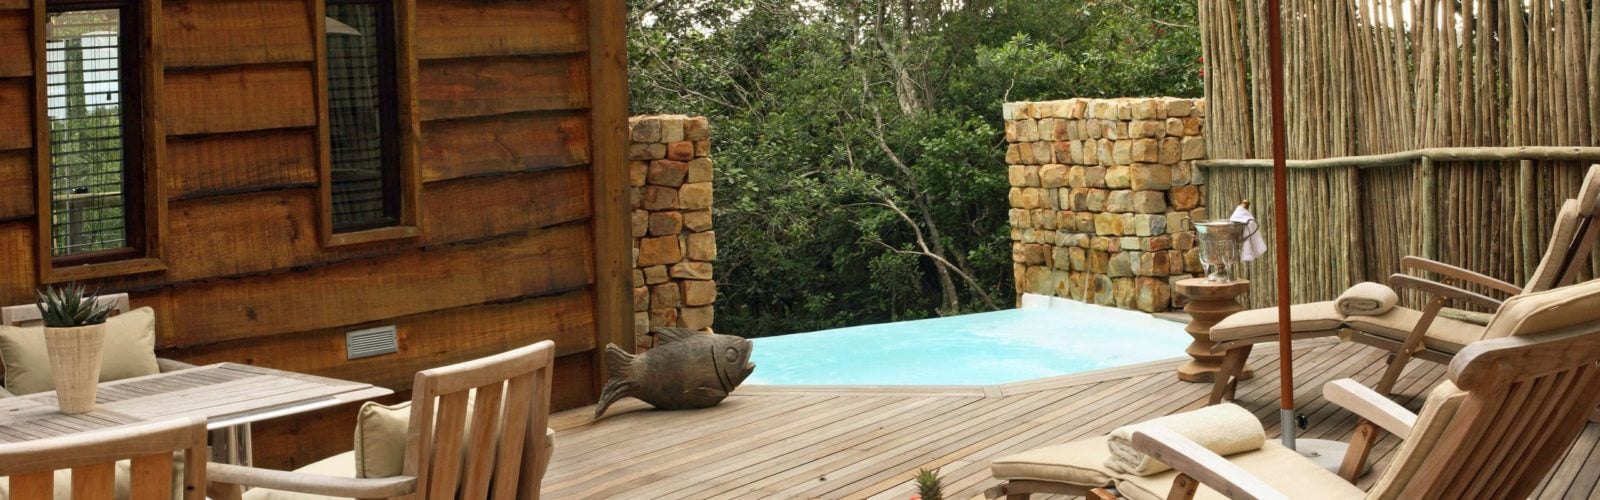 Pool deck, Tsala Treetop Lodge, The Garden Route, South Africa